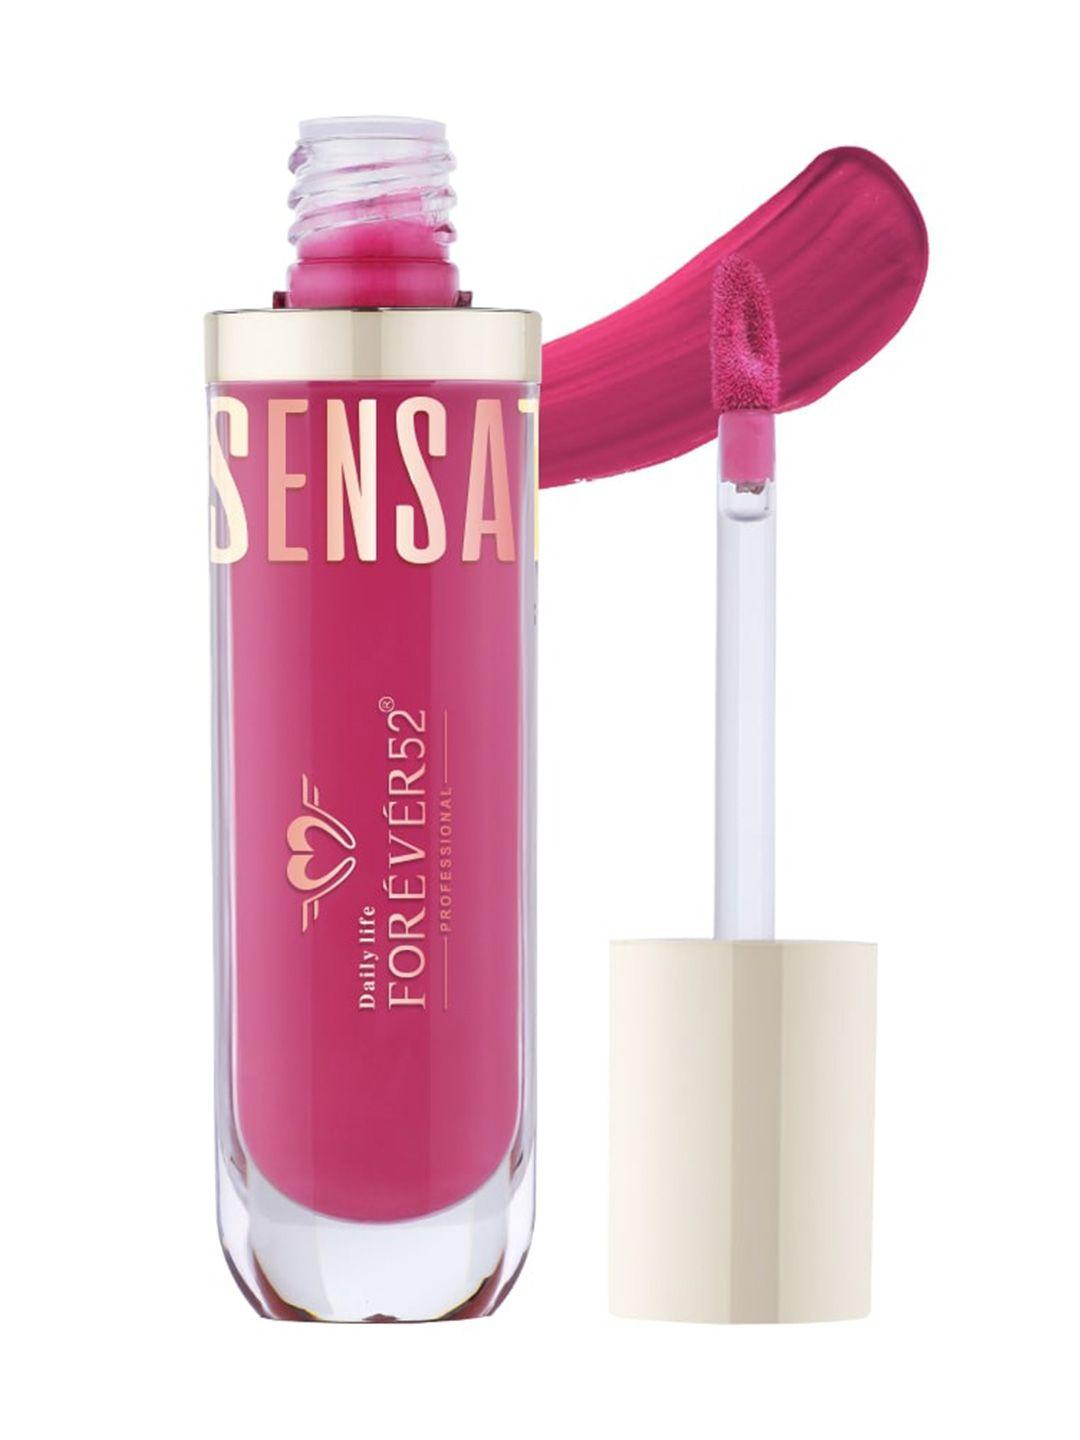 daily life forever52 sensational long lasting liquid lipstick 6ml - electric orchid 002